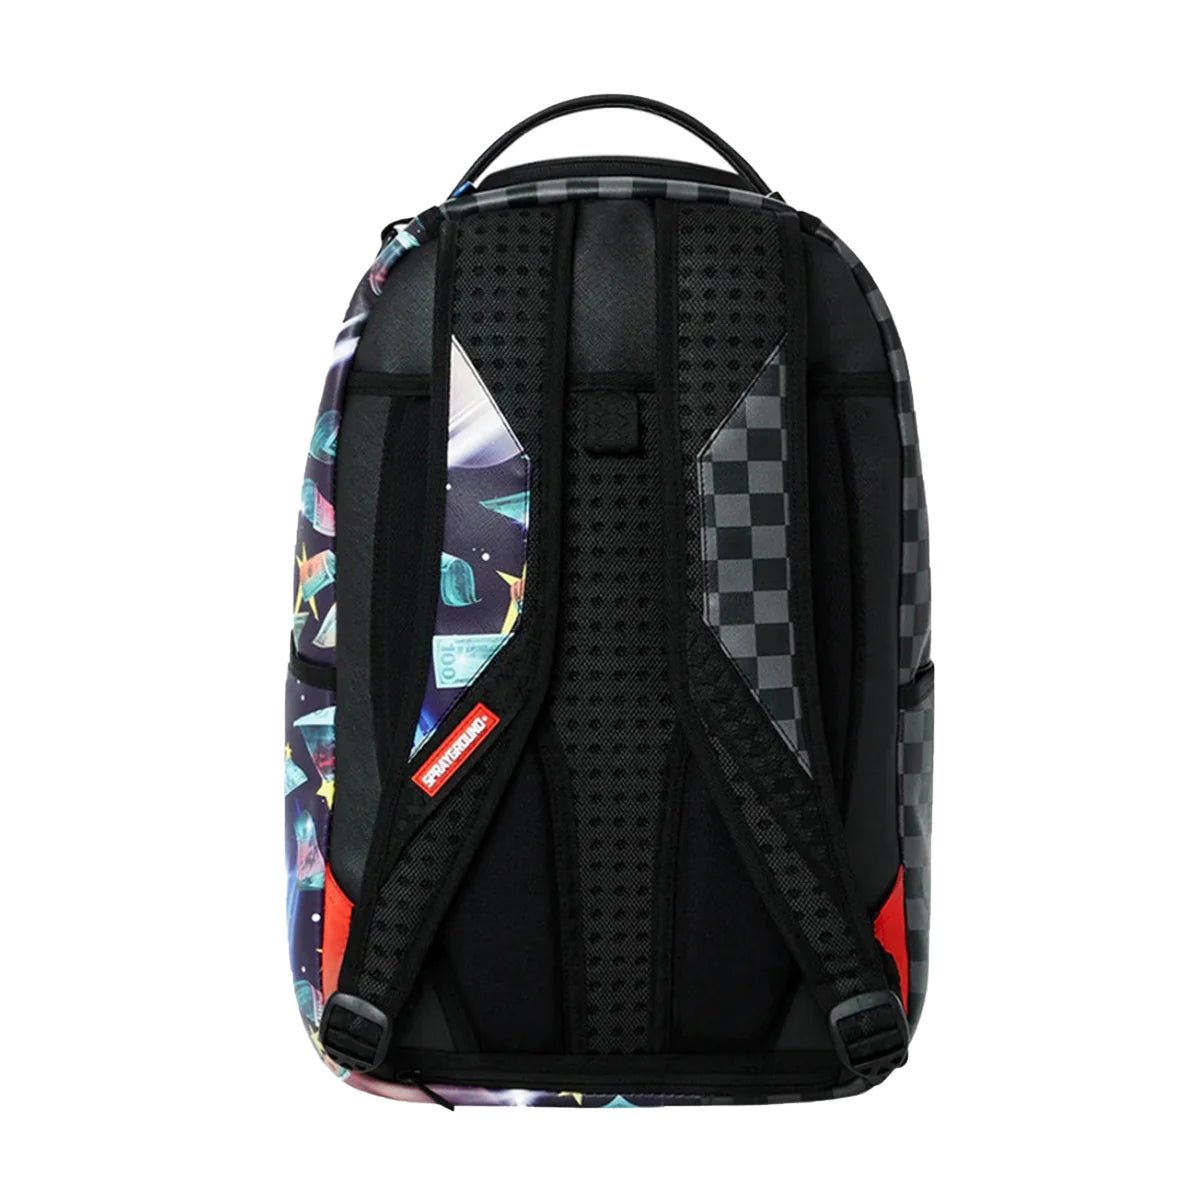 ASTROMANE THE REVEAL 2 DLXSV BACKPACK - Angel Luxury